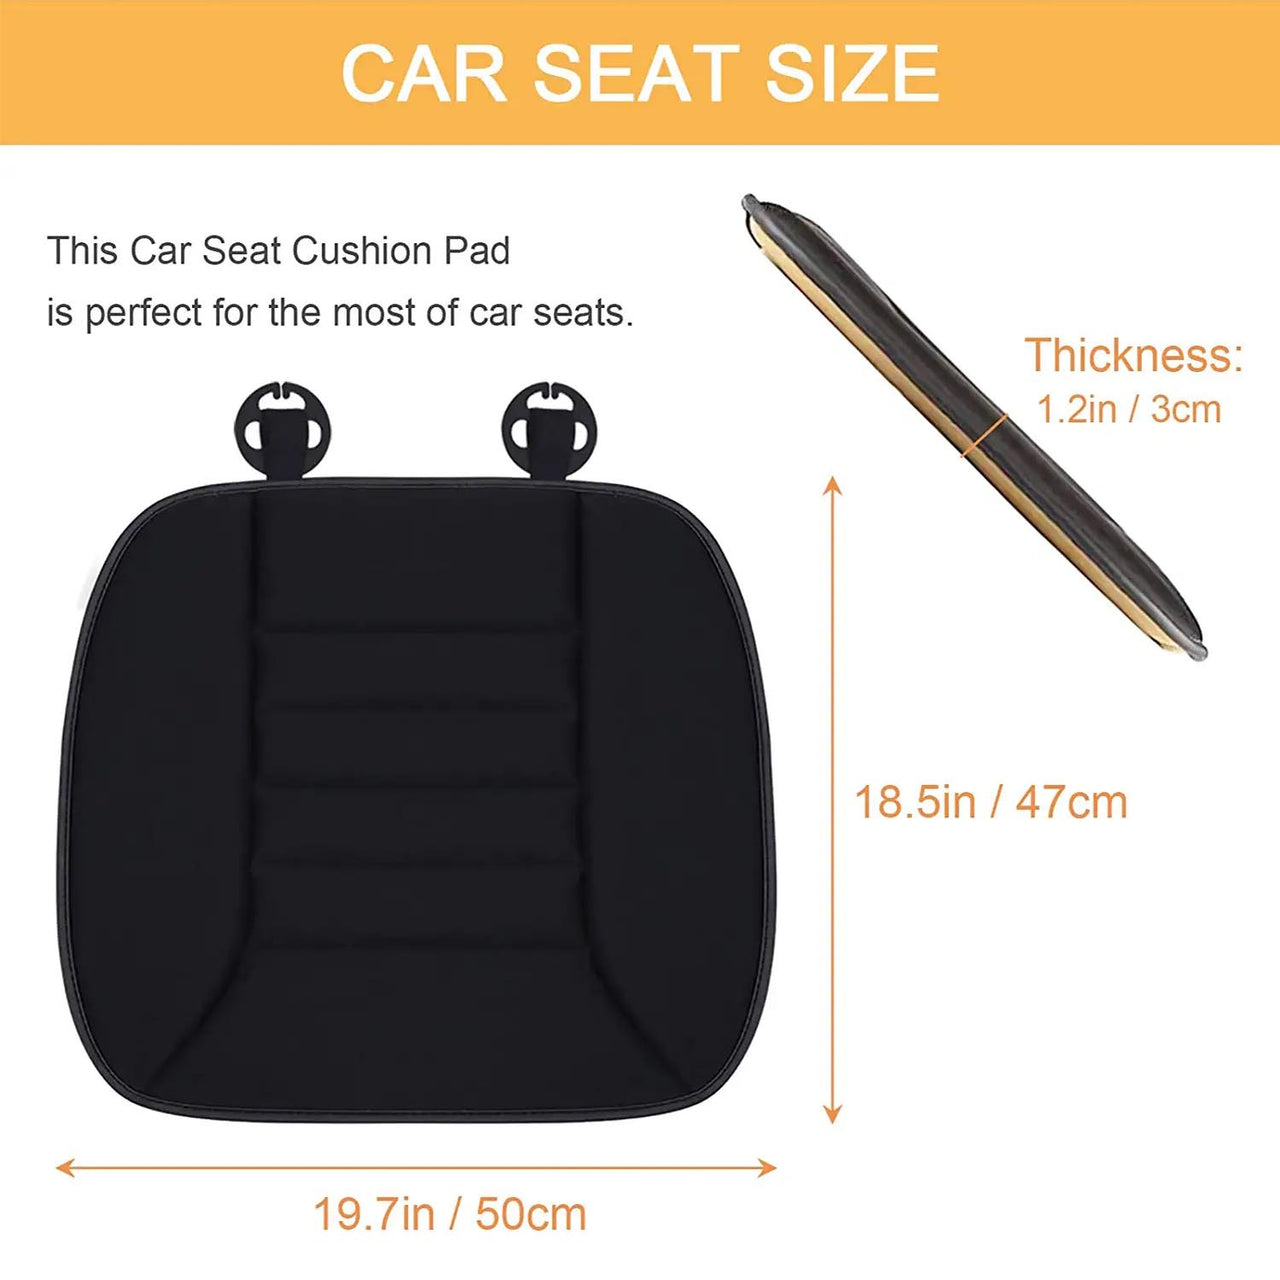 Car Seat Cushion with 1.2inch Comfort Memory Foam, Custom Logo For Your Cars, Seat Cushion for Car and Office Chair PE19989